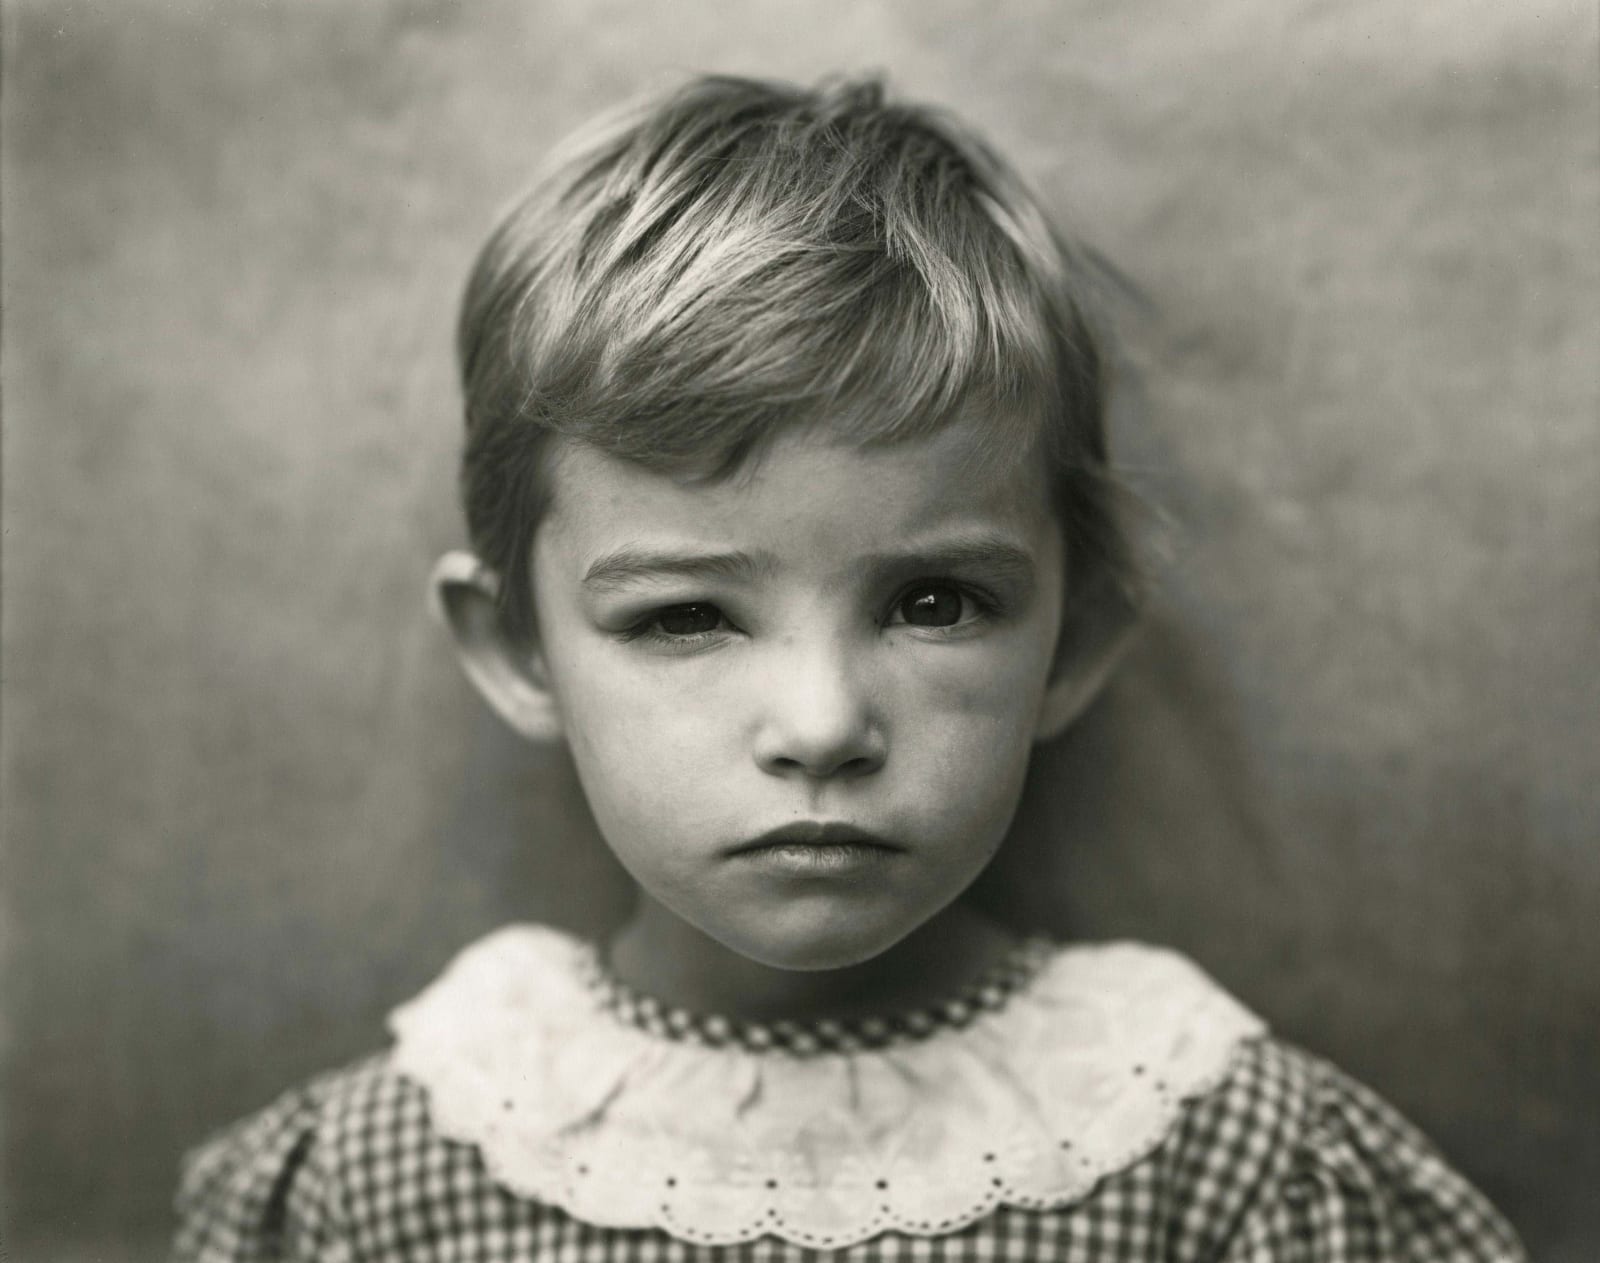 Sally Mann photograph Damaged Child from Immediate Family, portrait of daughter Jessie with swollen eye